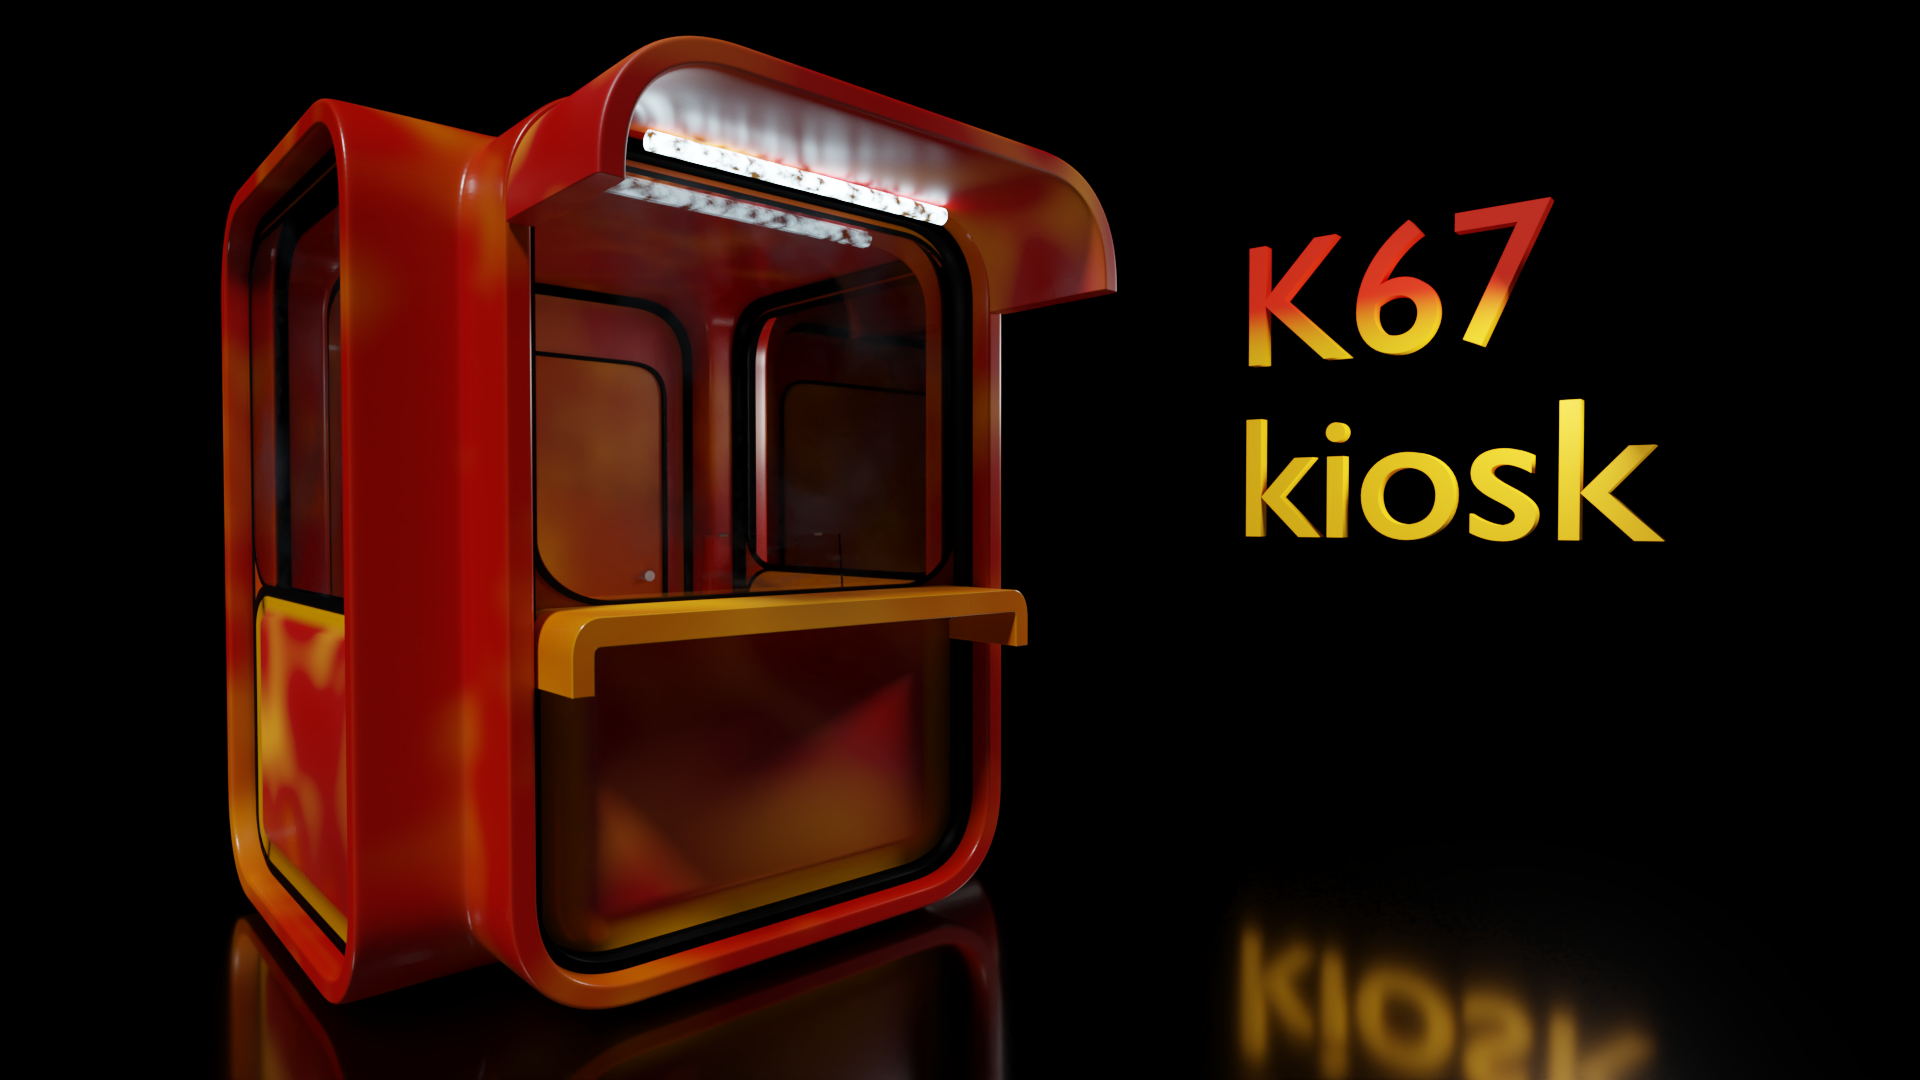 k67 kiosk red and yellow, made in Blender